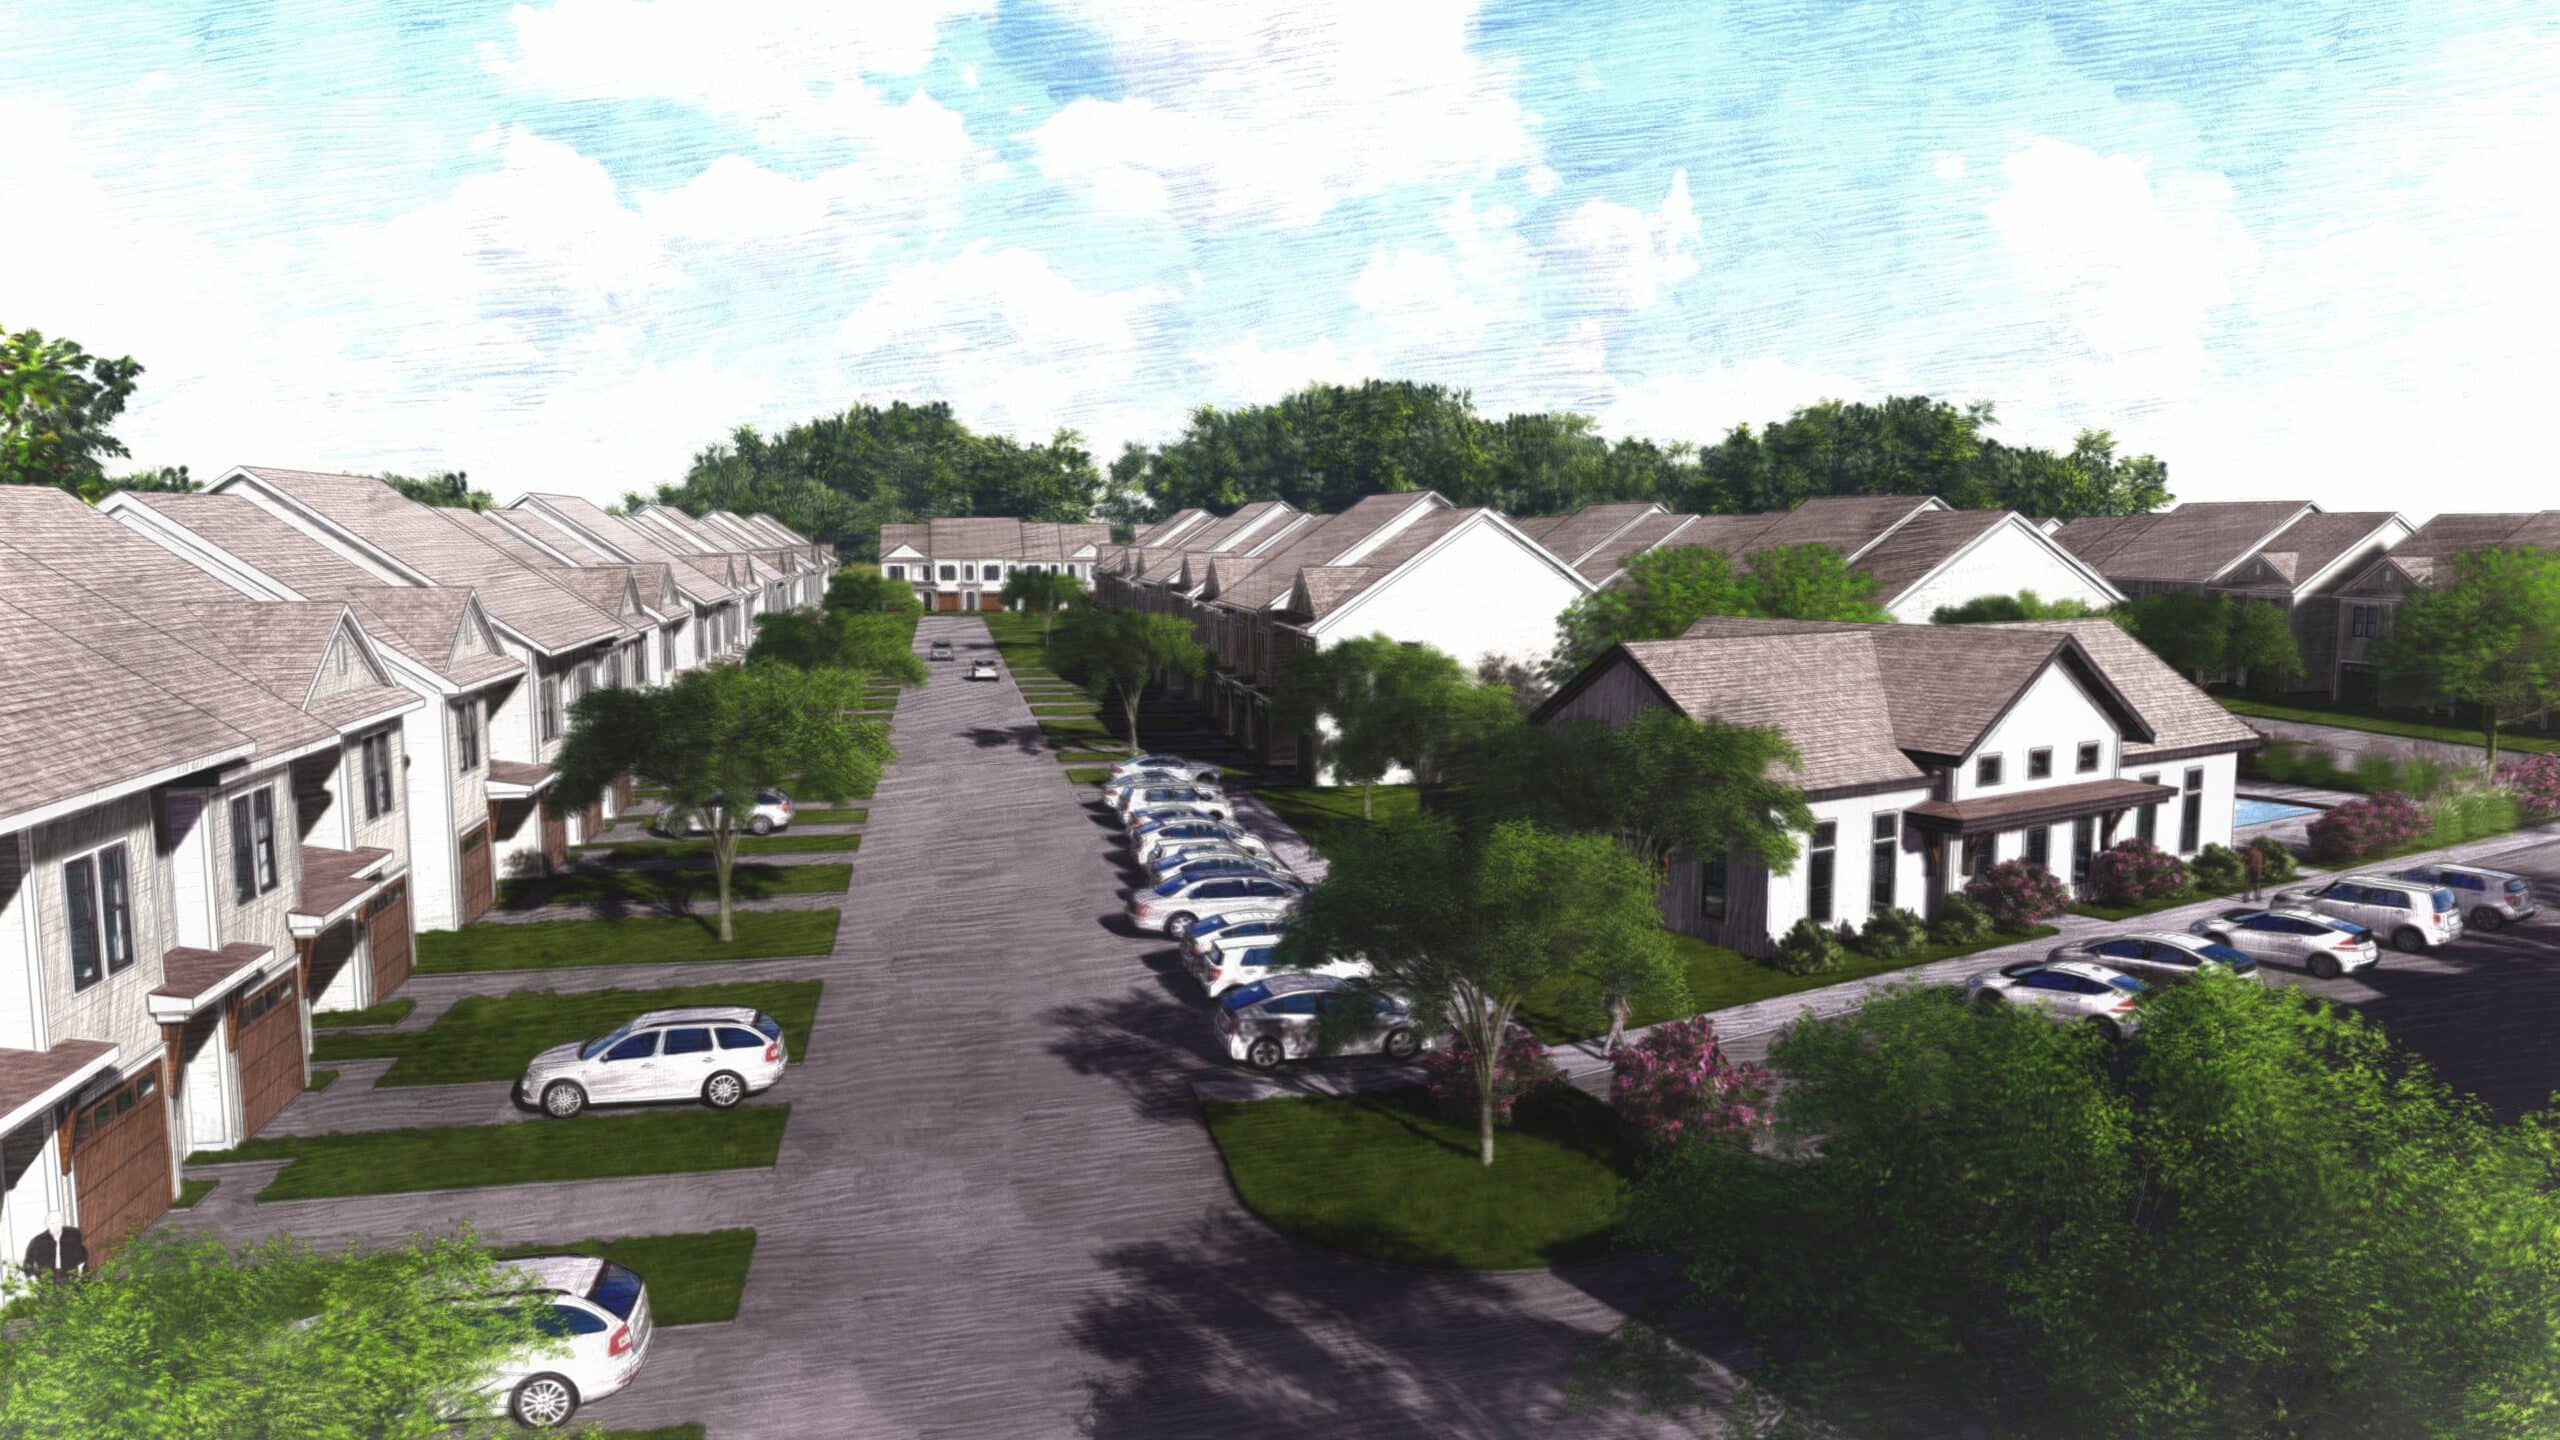 2022.02.04 - HICKORY TOWNHOMES - RENDERING 2